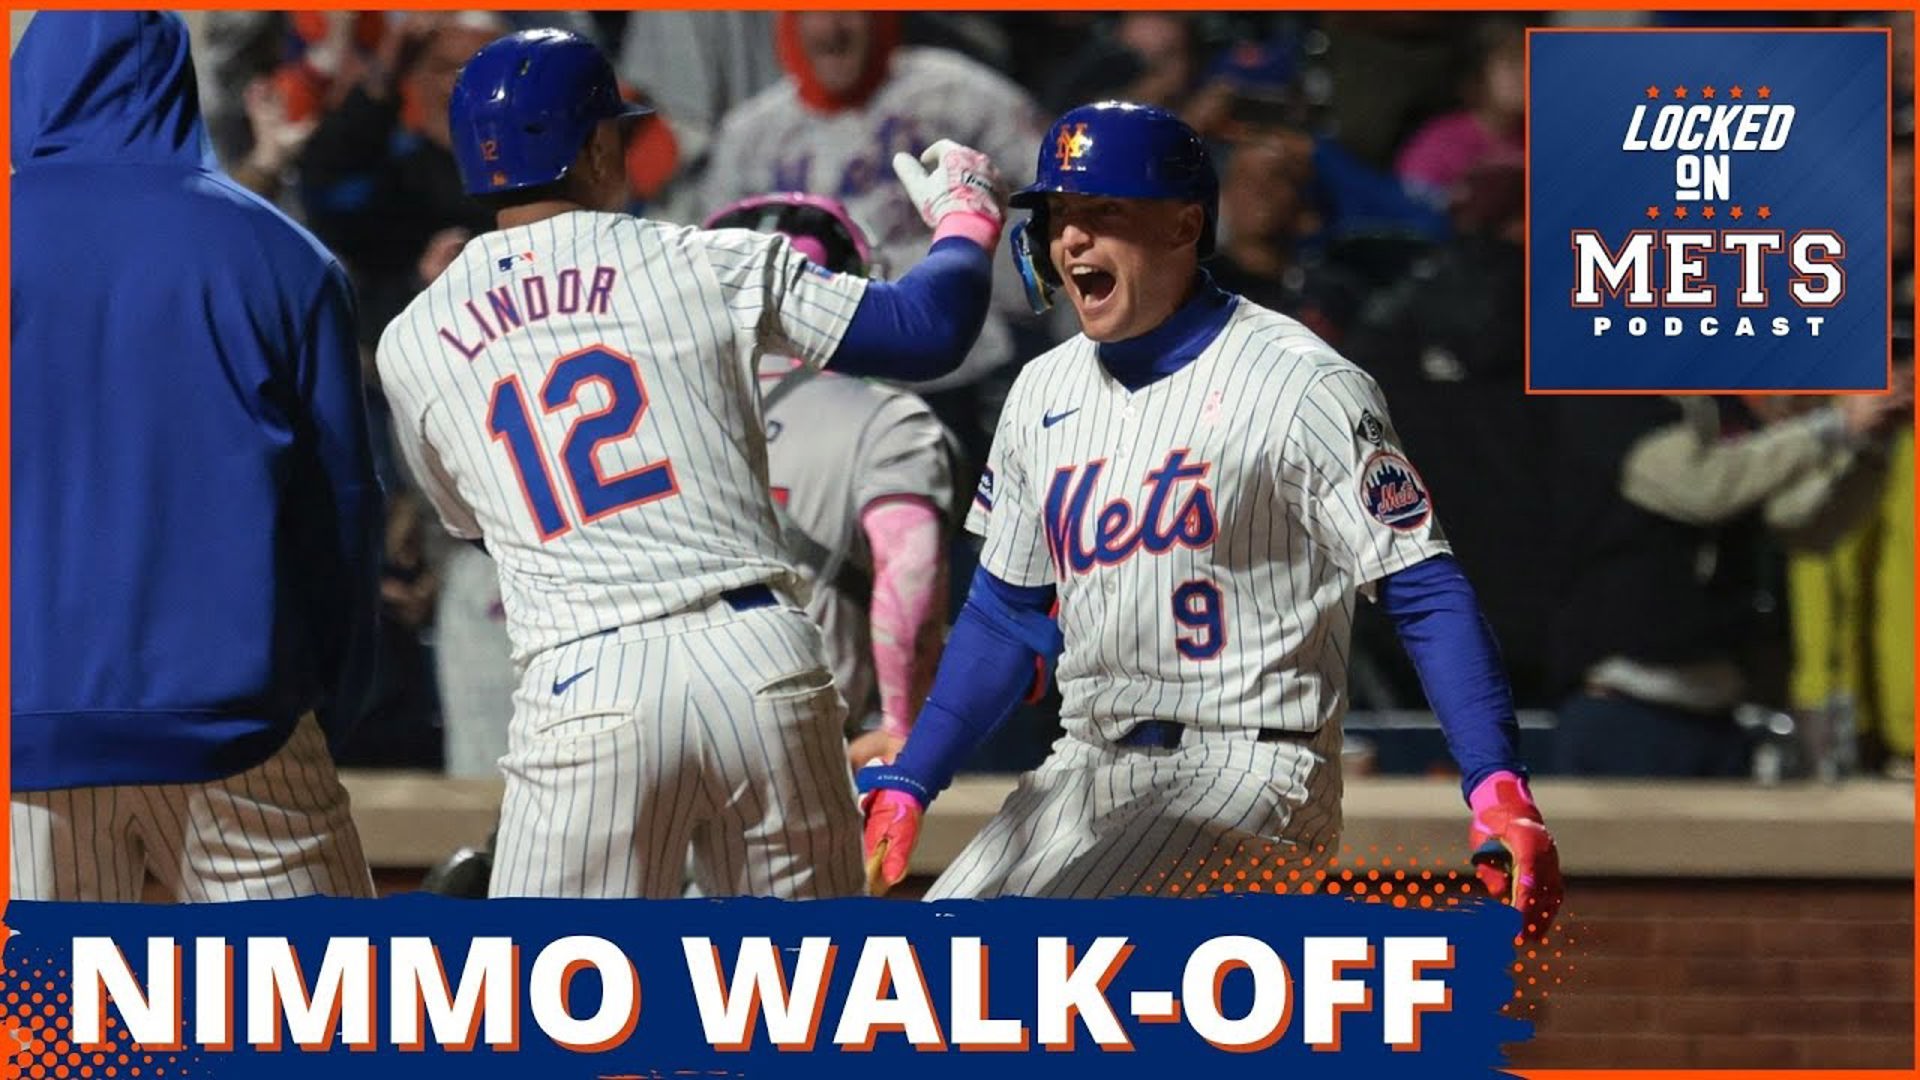 The Mets Best Hitter (Nimmo) Saves Them From Braves Sweep